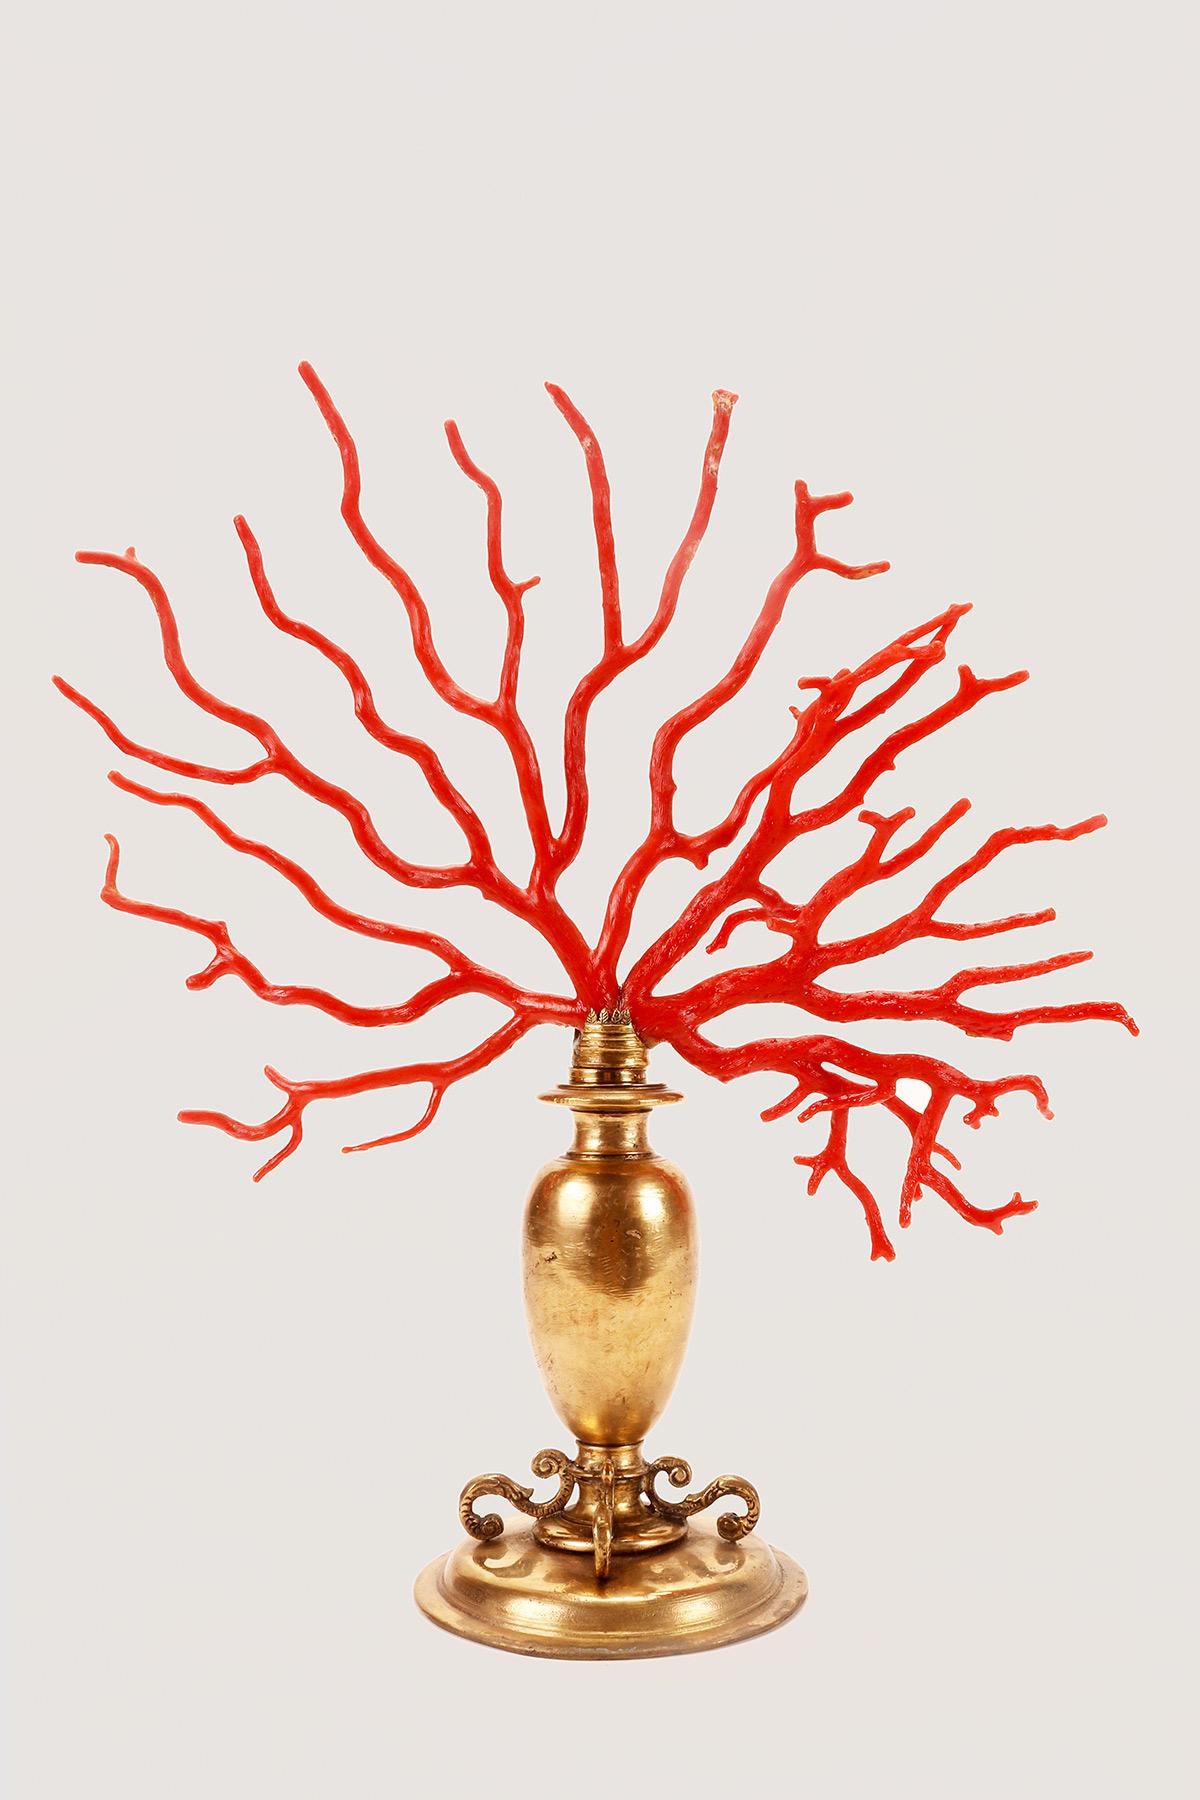 This large branch of Mediterranean coral, 'Corallium Rubrum' is mounted on a gilt bronze base. The creation of the amphora-shaped base involves various techniques: lost wax casting, mold casting, chiseling. The base is circular, with a ribbed edge,